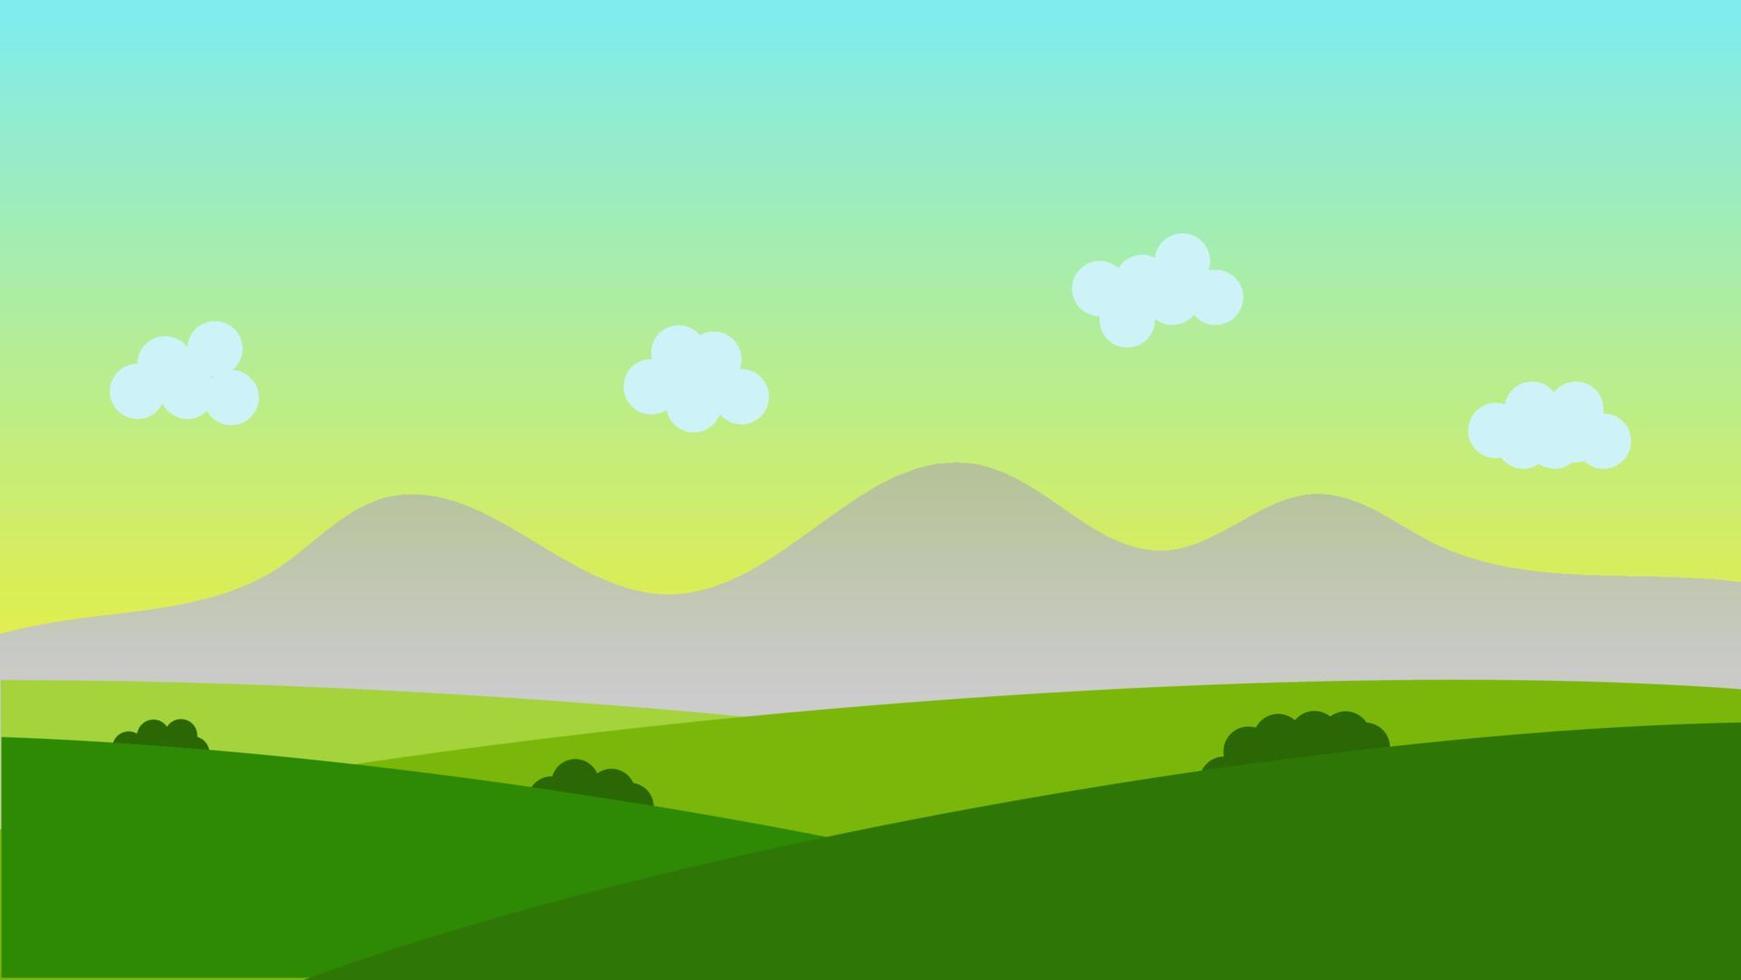 landscape cartoon scene with green trees on hills and white fluffy cloud in summer blue sky background vector